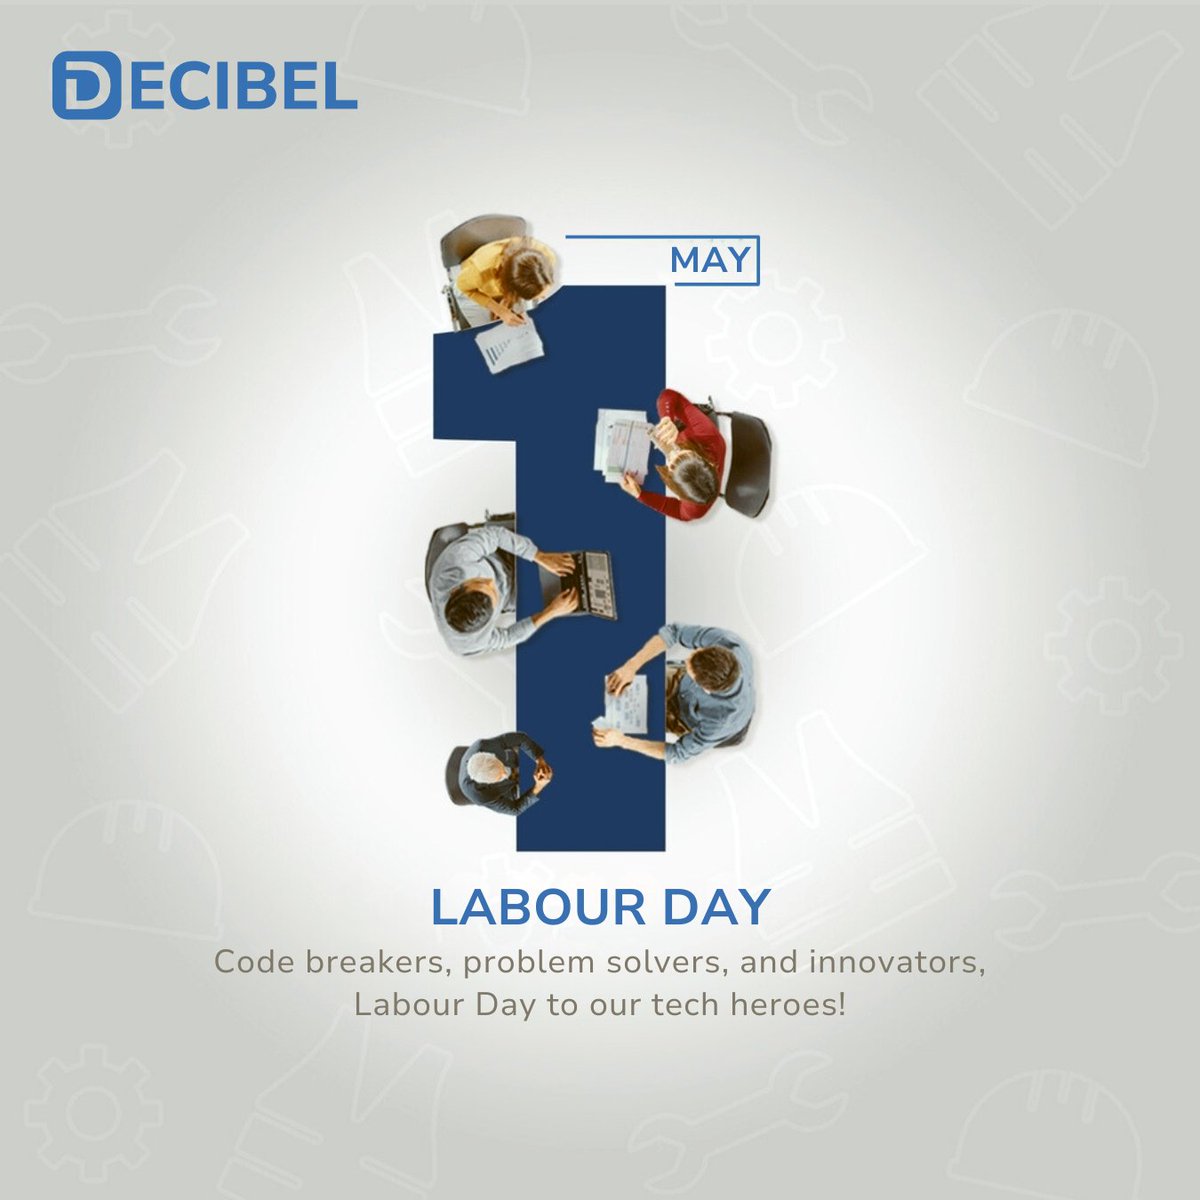 Happy Labour Day to all the brilliant minds out there who crack the code of innovation every day! Let's celebrate the dedication and hard work of our tech heroes. #LabourDay #TechHeroes #Innovation #ProblemSolvers #CodeBreakers #Decibel